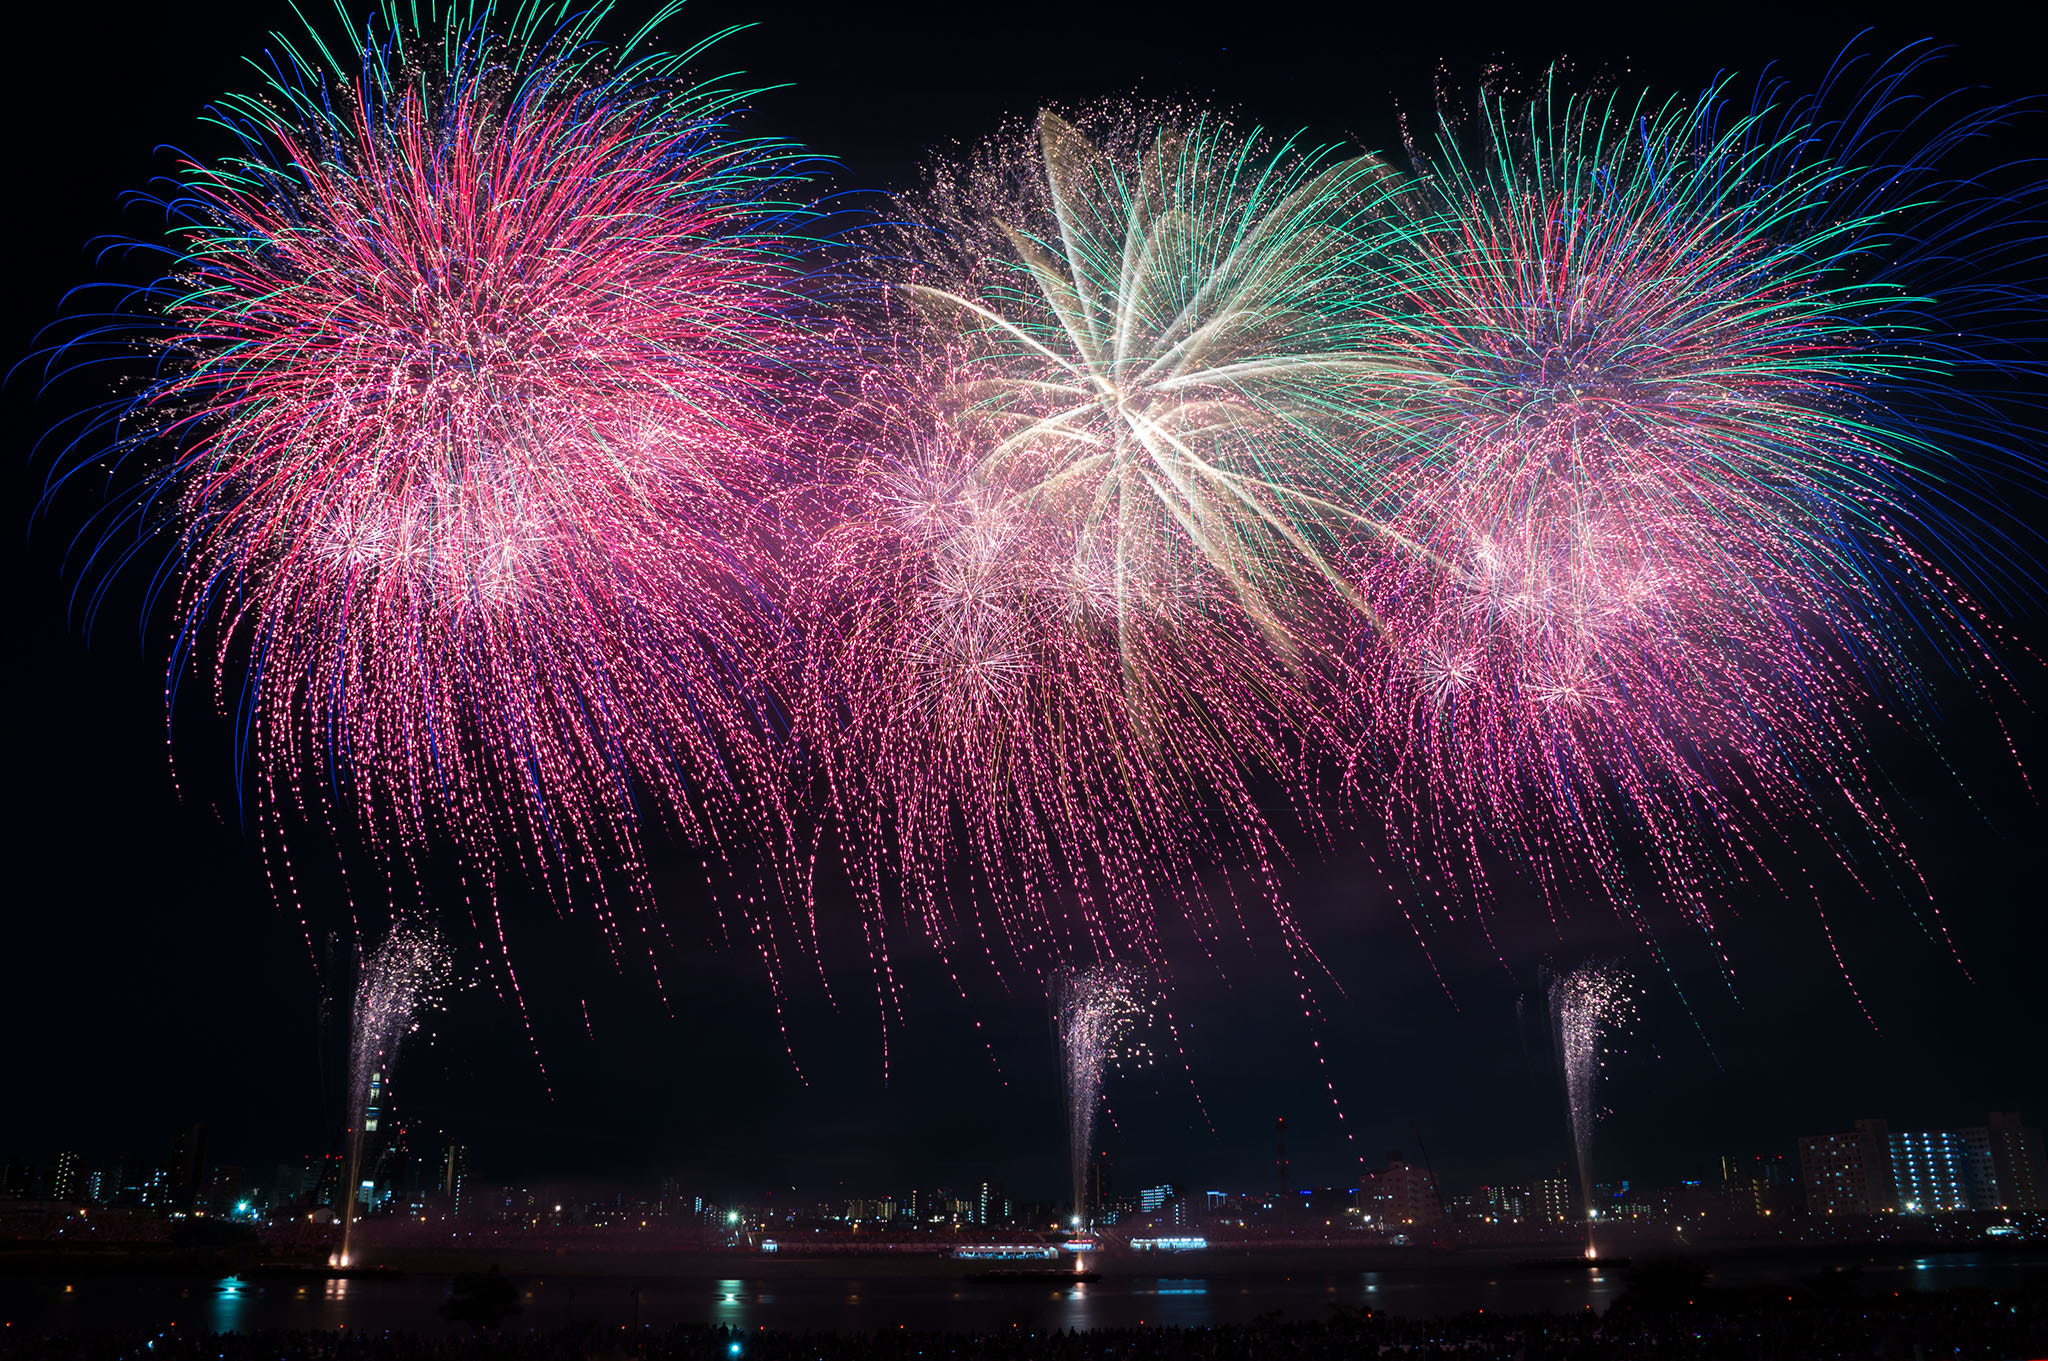 Sony SLT-A57 + Sony DT 16-105mm F3.5-5.6 sample photo. Fireworks in adachi ward, japan photography